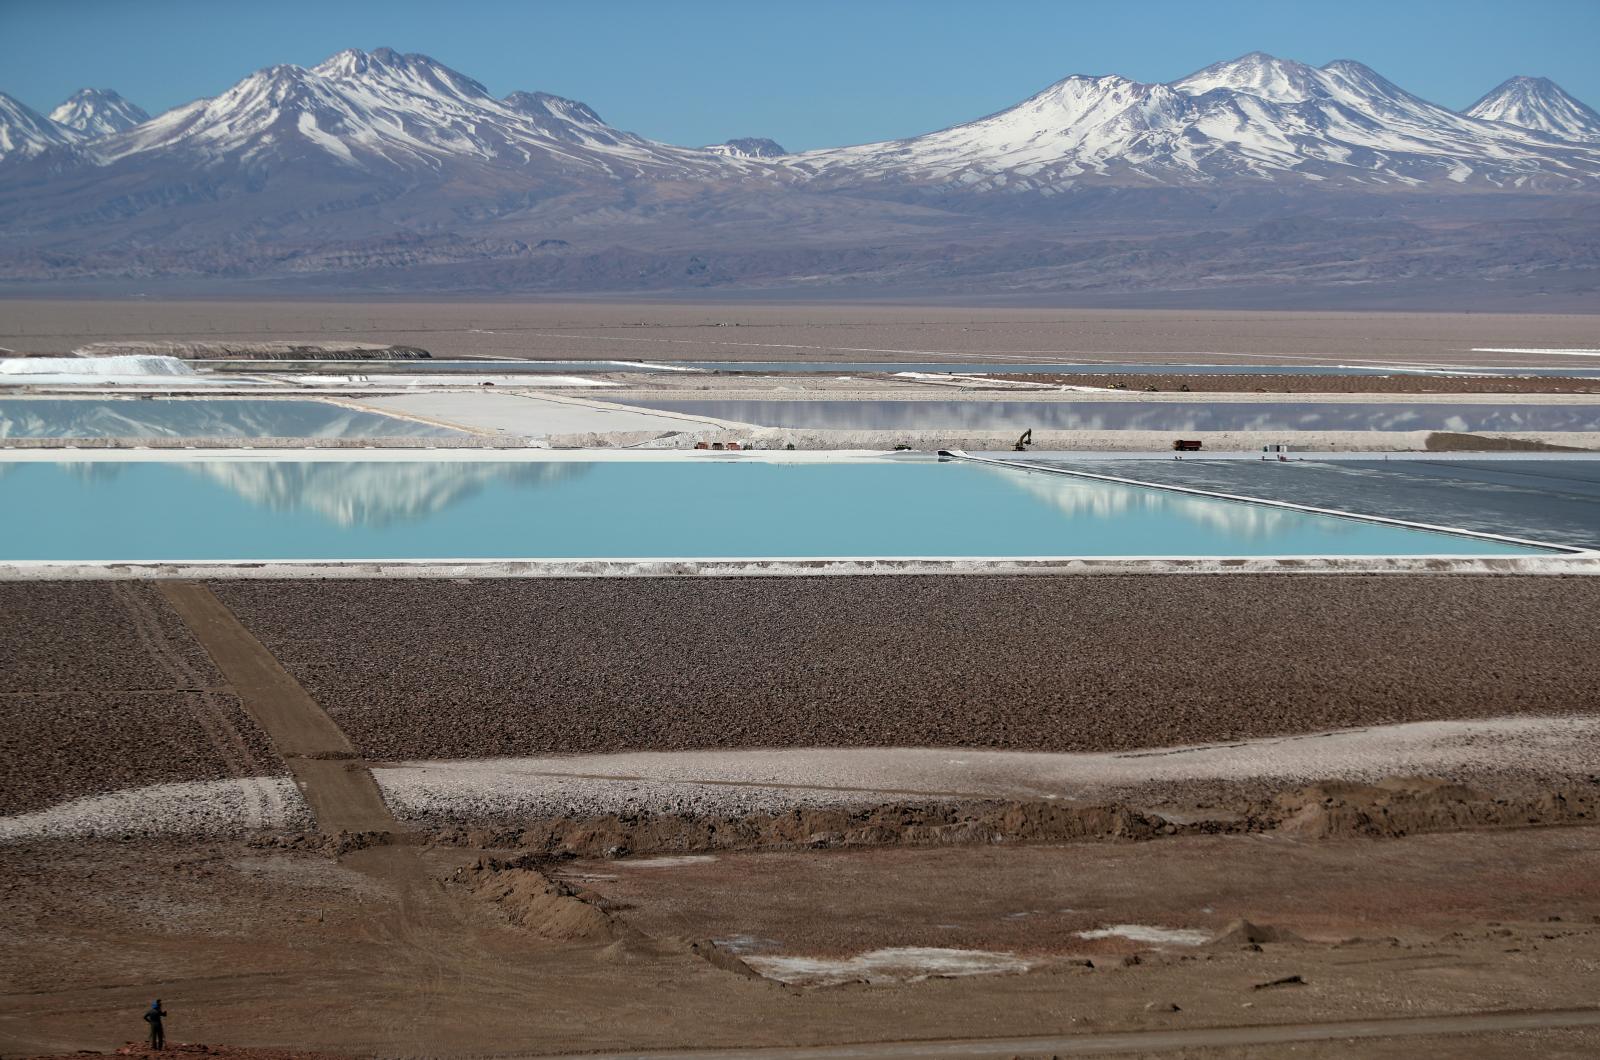 A Bill Gates-led fund is pumping millions into “game changer” lithium mining technology